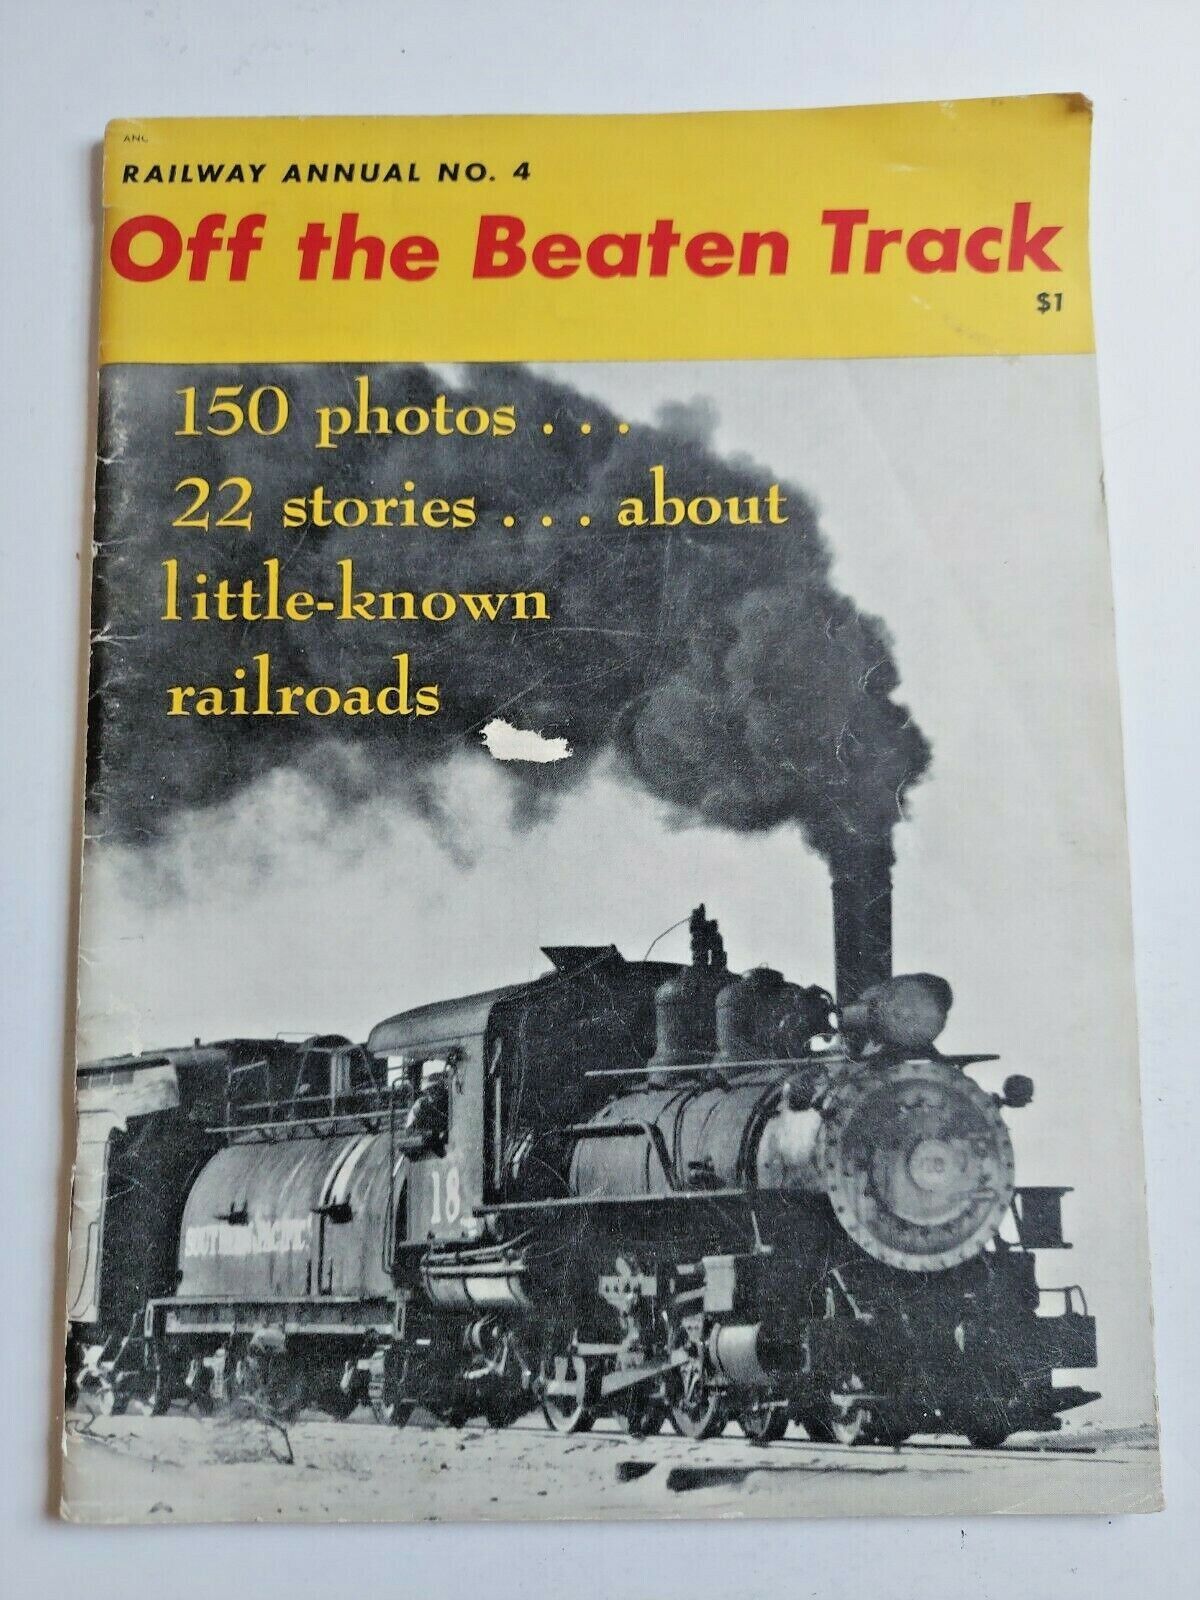 Off the Beaten Track Railway Annual #4, 1955, 150 photos, 22 stories.....